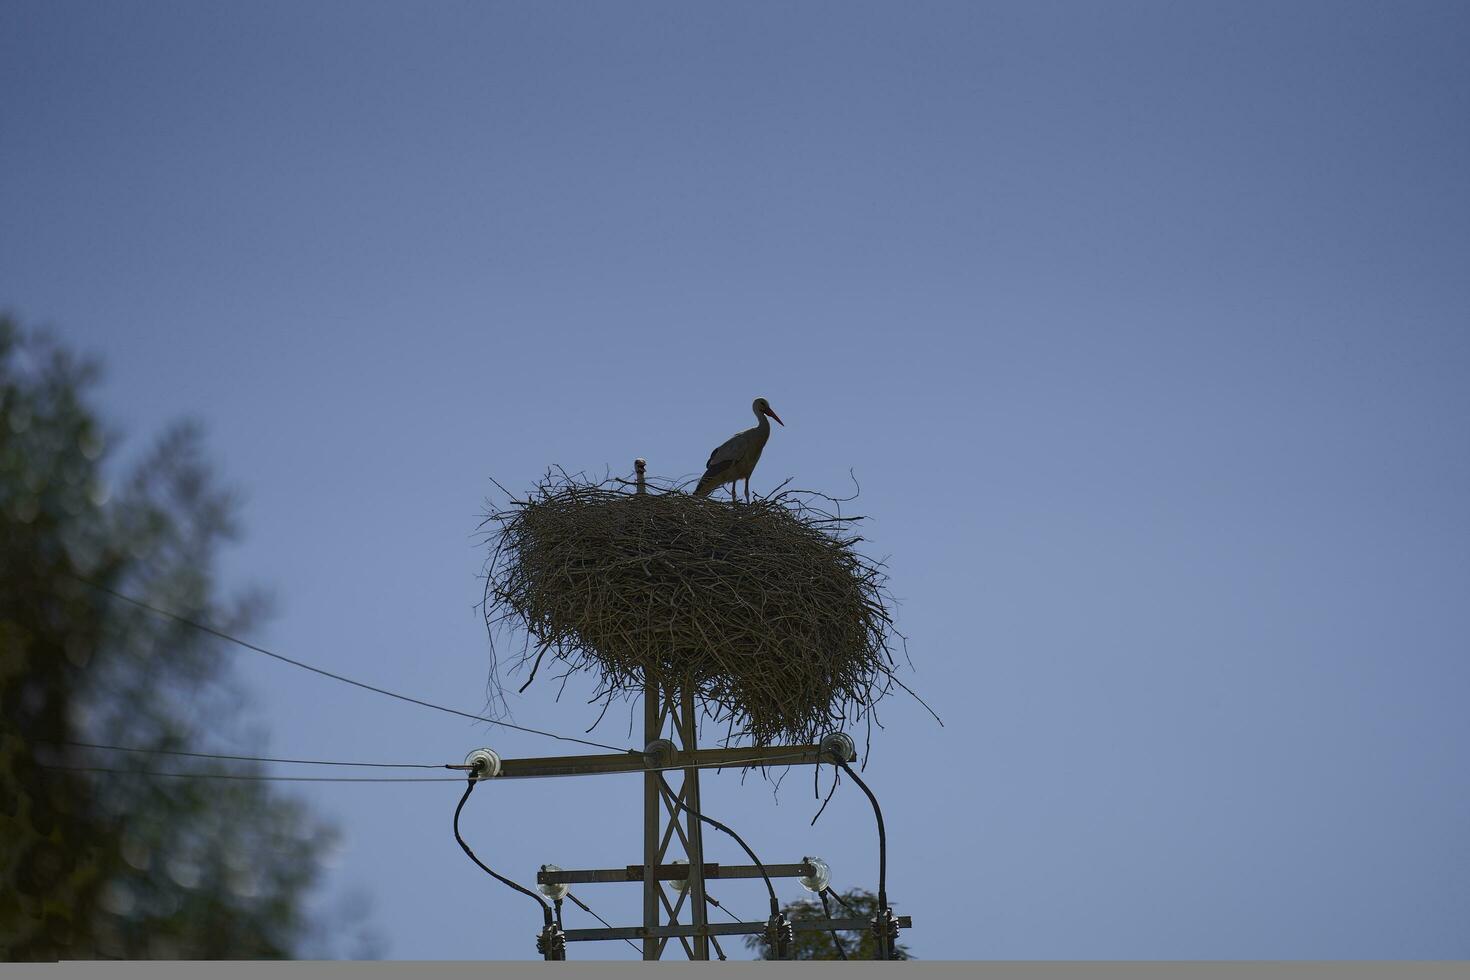 Iconic Sight. Stork Standing Tall, Guarding its Nest atop an Electricity Tower - A Distinctive Spanish Symbol photo